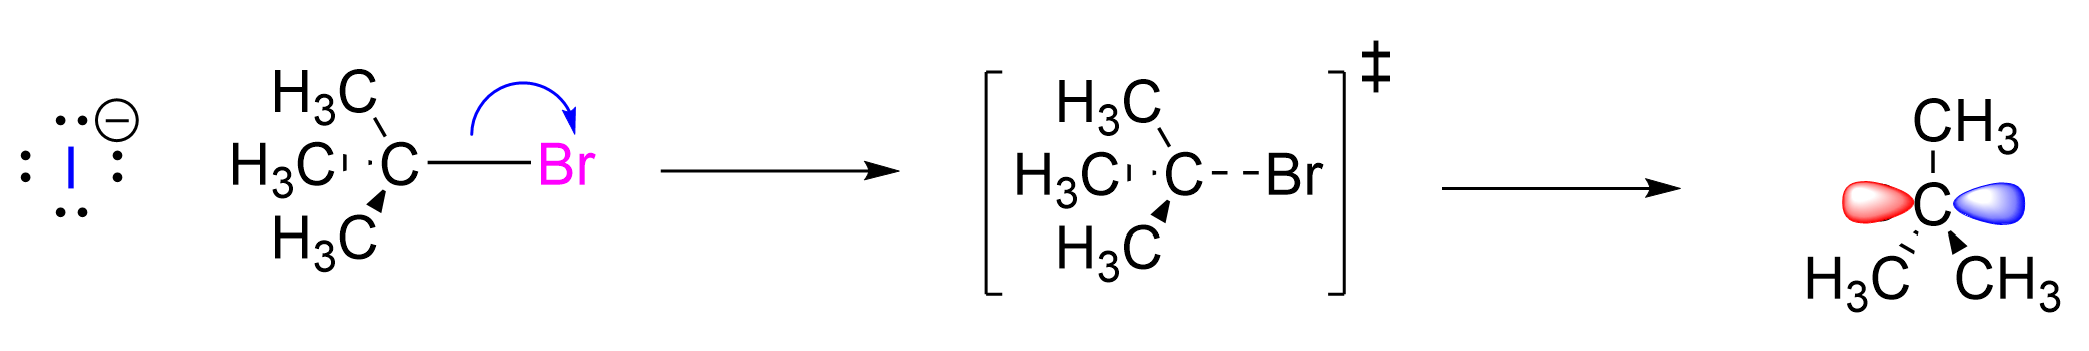 Sn1 reaction between iodide (I-) and tert-butyl bromide ((CH3)3CBr). It illustrates the transition state in square brackets where Br is partially bound to the compound with dashed lines, and the carbocation intermediate where the 3 methyl groups and C are in a trigonal planar geometry and an empty p-orbital horizontally across the C.